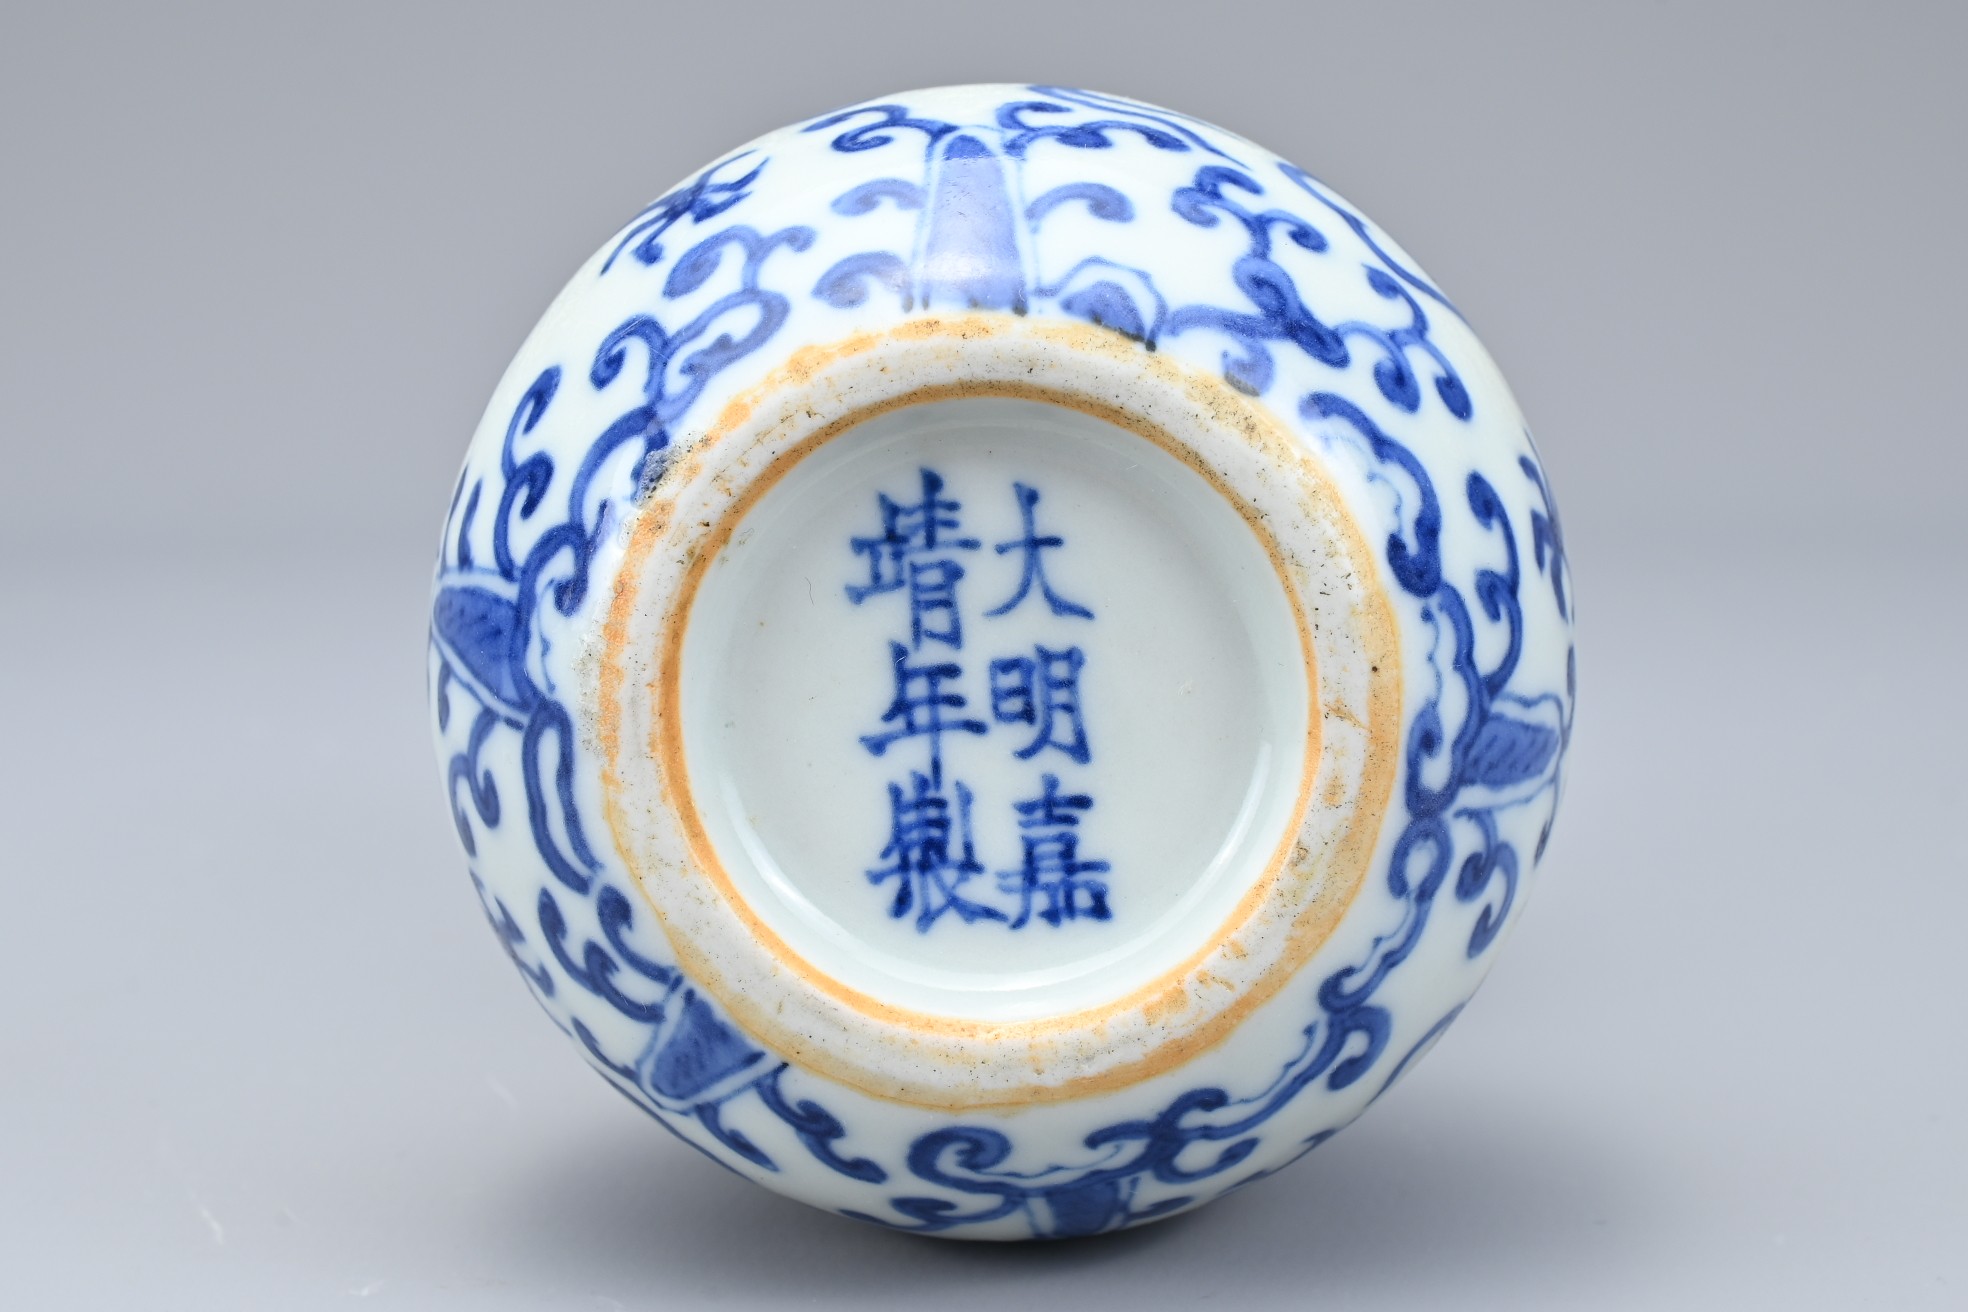 A CHINESE BLUE AND WHITE PORCELAIN DOUBLE-GOURD DRAGON VASE, MARK AND PERIOD OF JIAJING (1522-1566) - Image 8 of 9